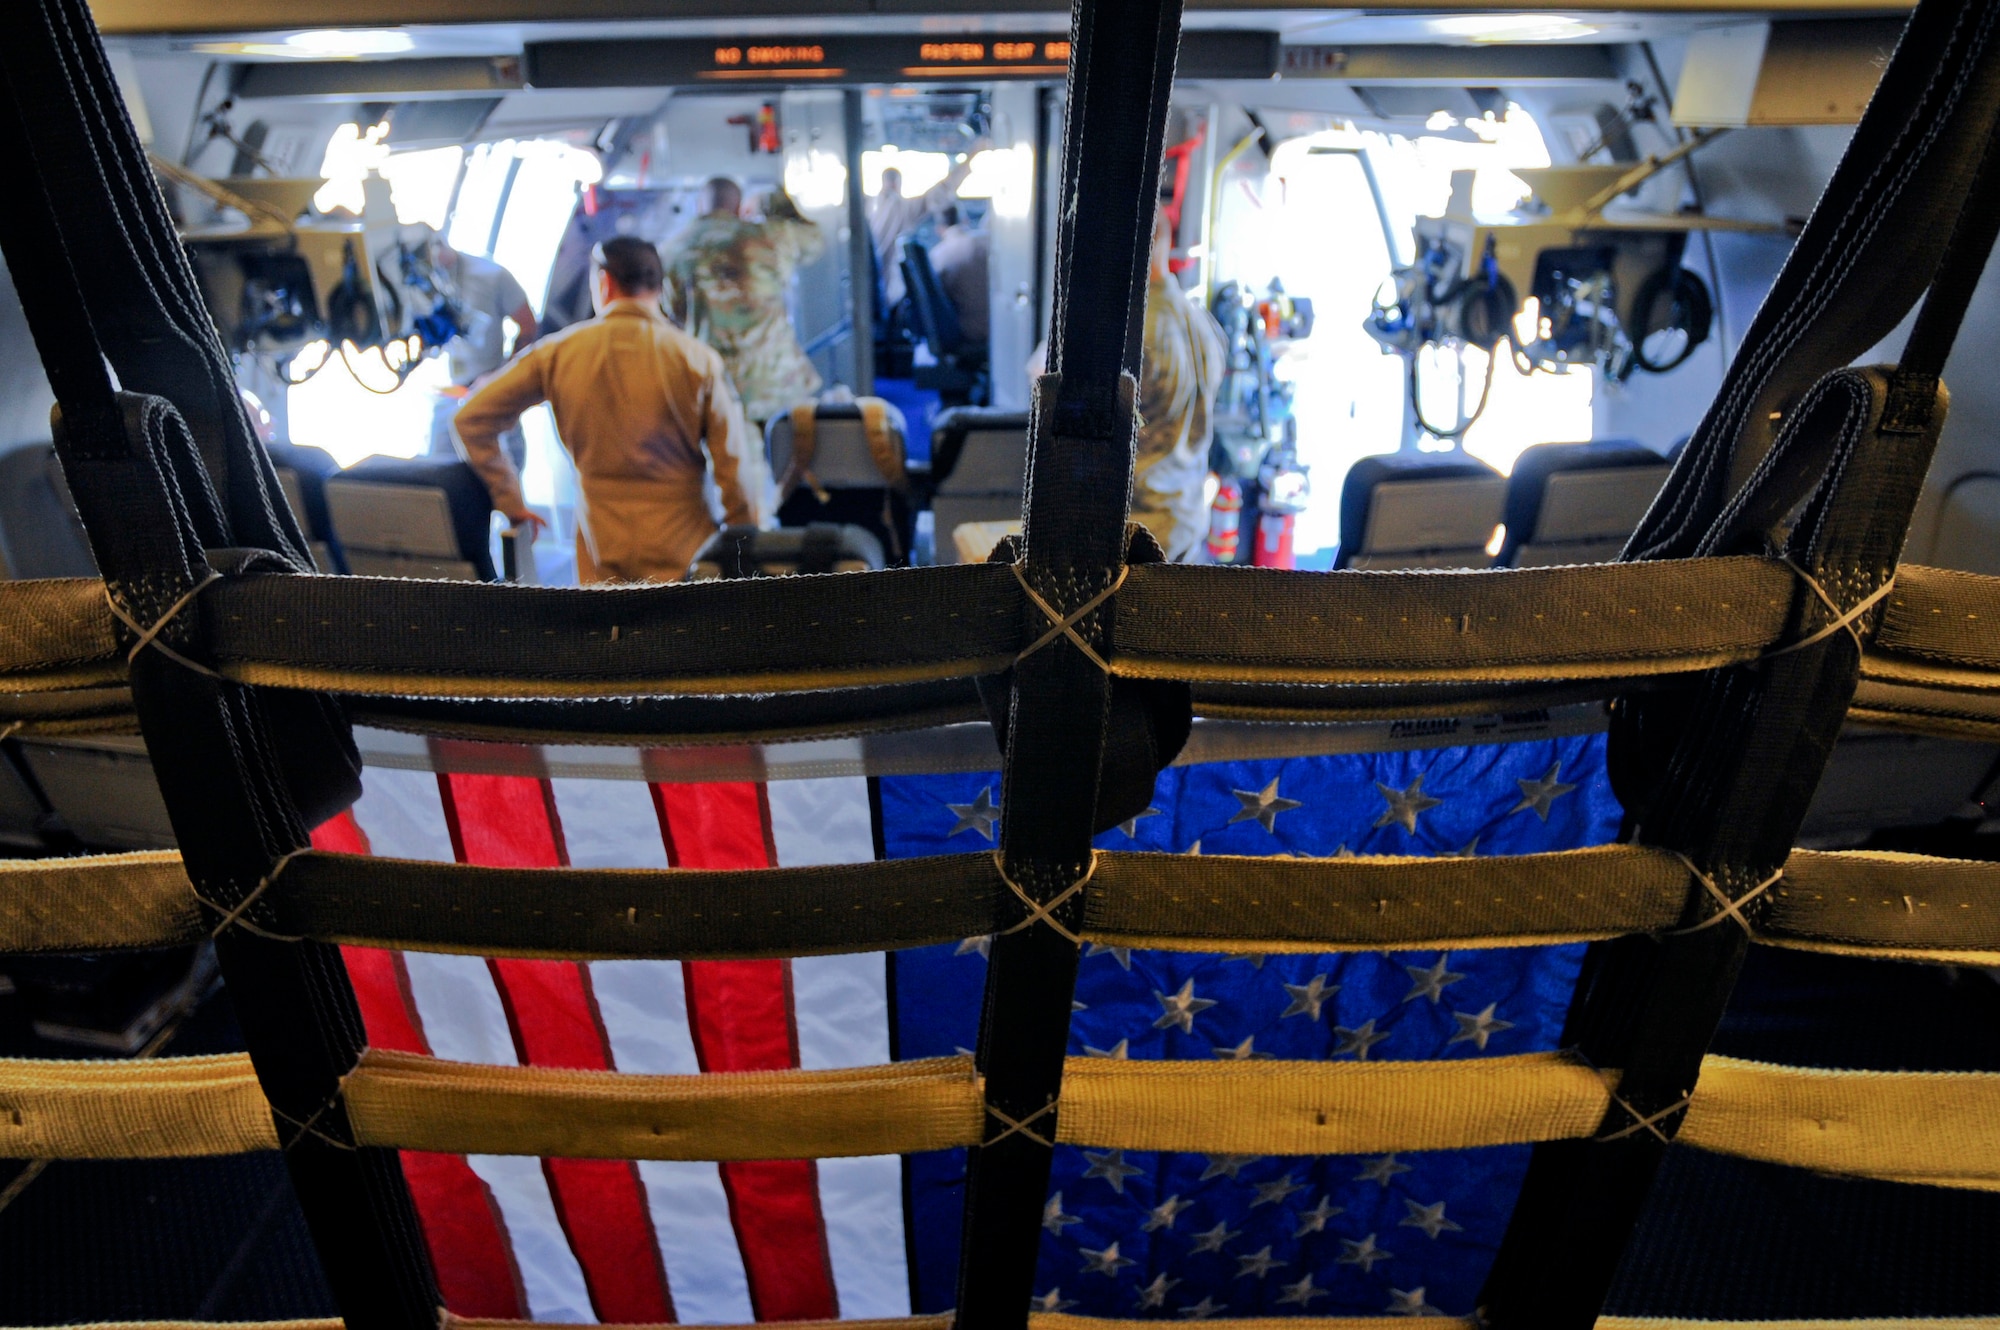 An U.S. flag hangs in the passenger area of a KC-10 Extender before take-off from the 380th Air Expeditionary Wing, Al Dhafra Air Base, United Arab Emirates, Feb. 2, 2018. Flags flown during combat missions are given away as gifts in an effort to thank family and friends for their support to the military. (U.S. Air Force photo by Airman 1st Class D. Blake Browning)